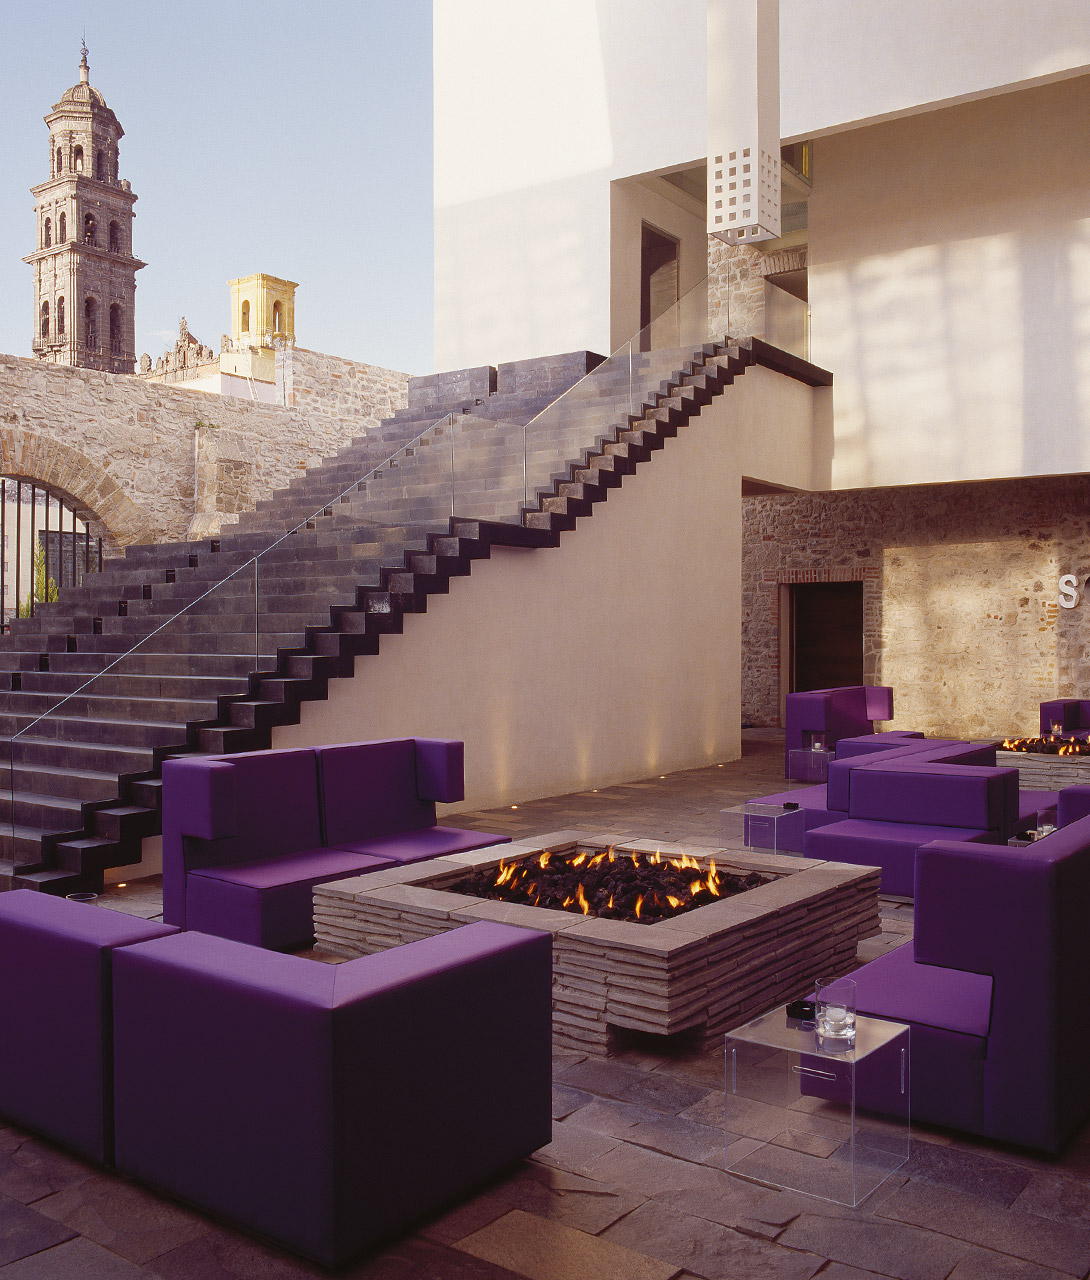 la-purificadora-architecture-hall-stairs-fireplace-city-view-a-01.jpg